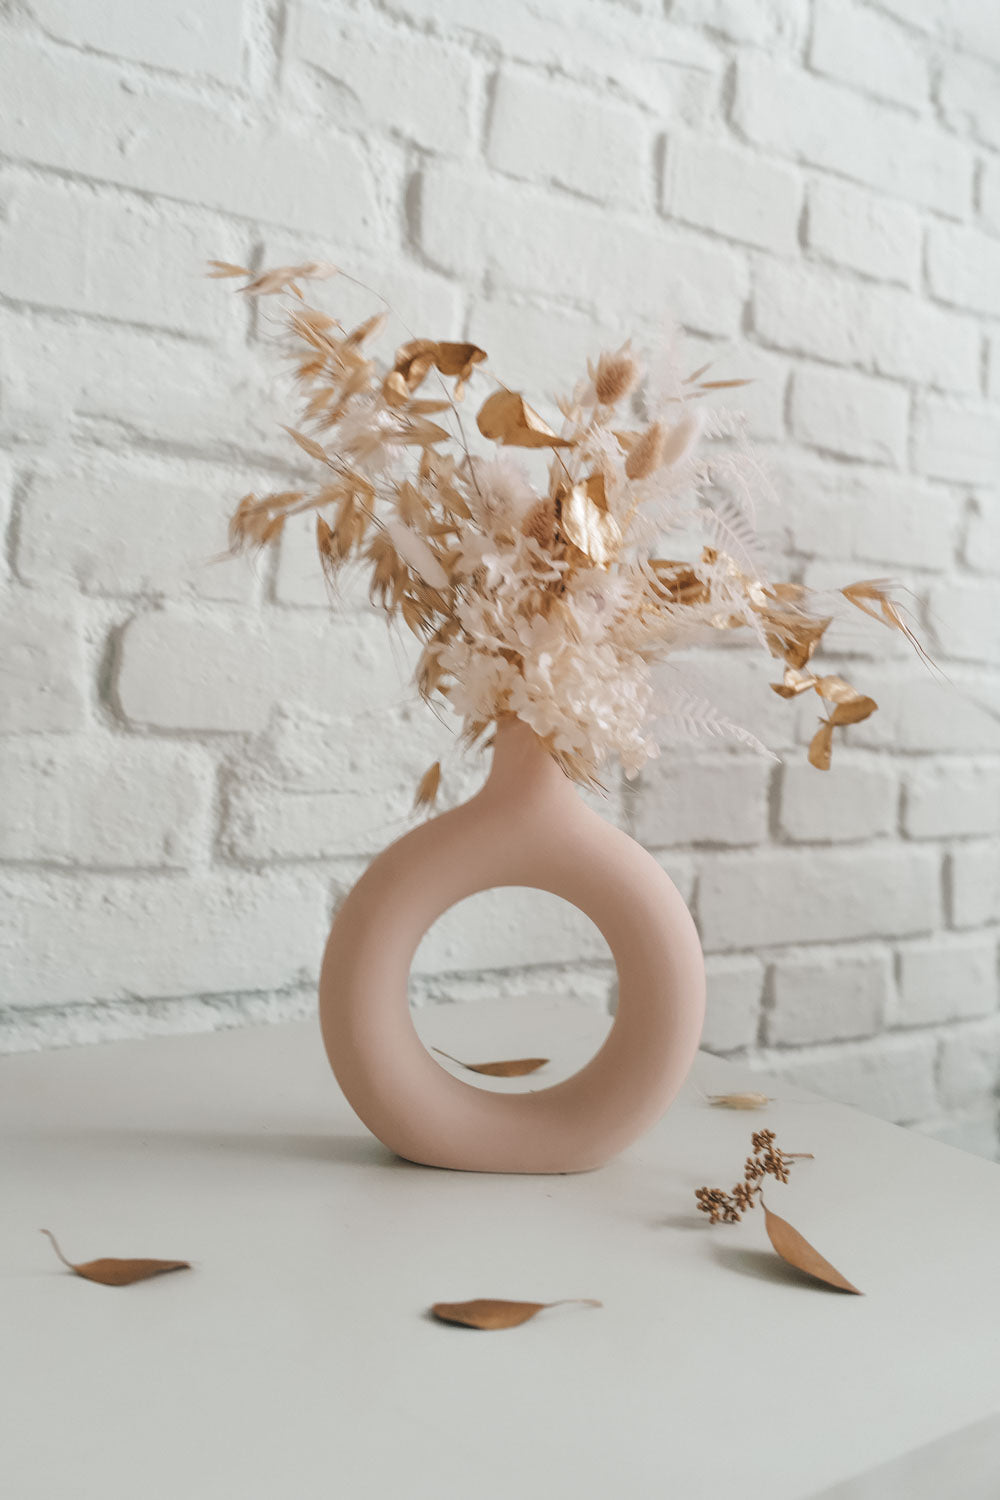 Everlasting Flowers in a Donut Vase Tina